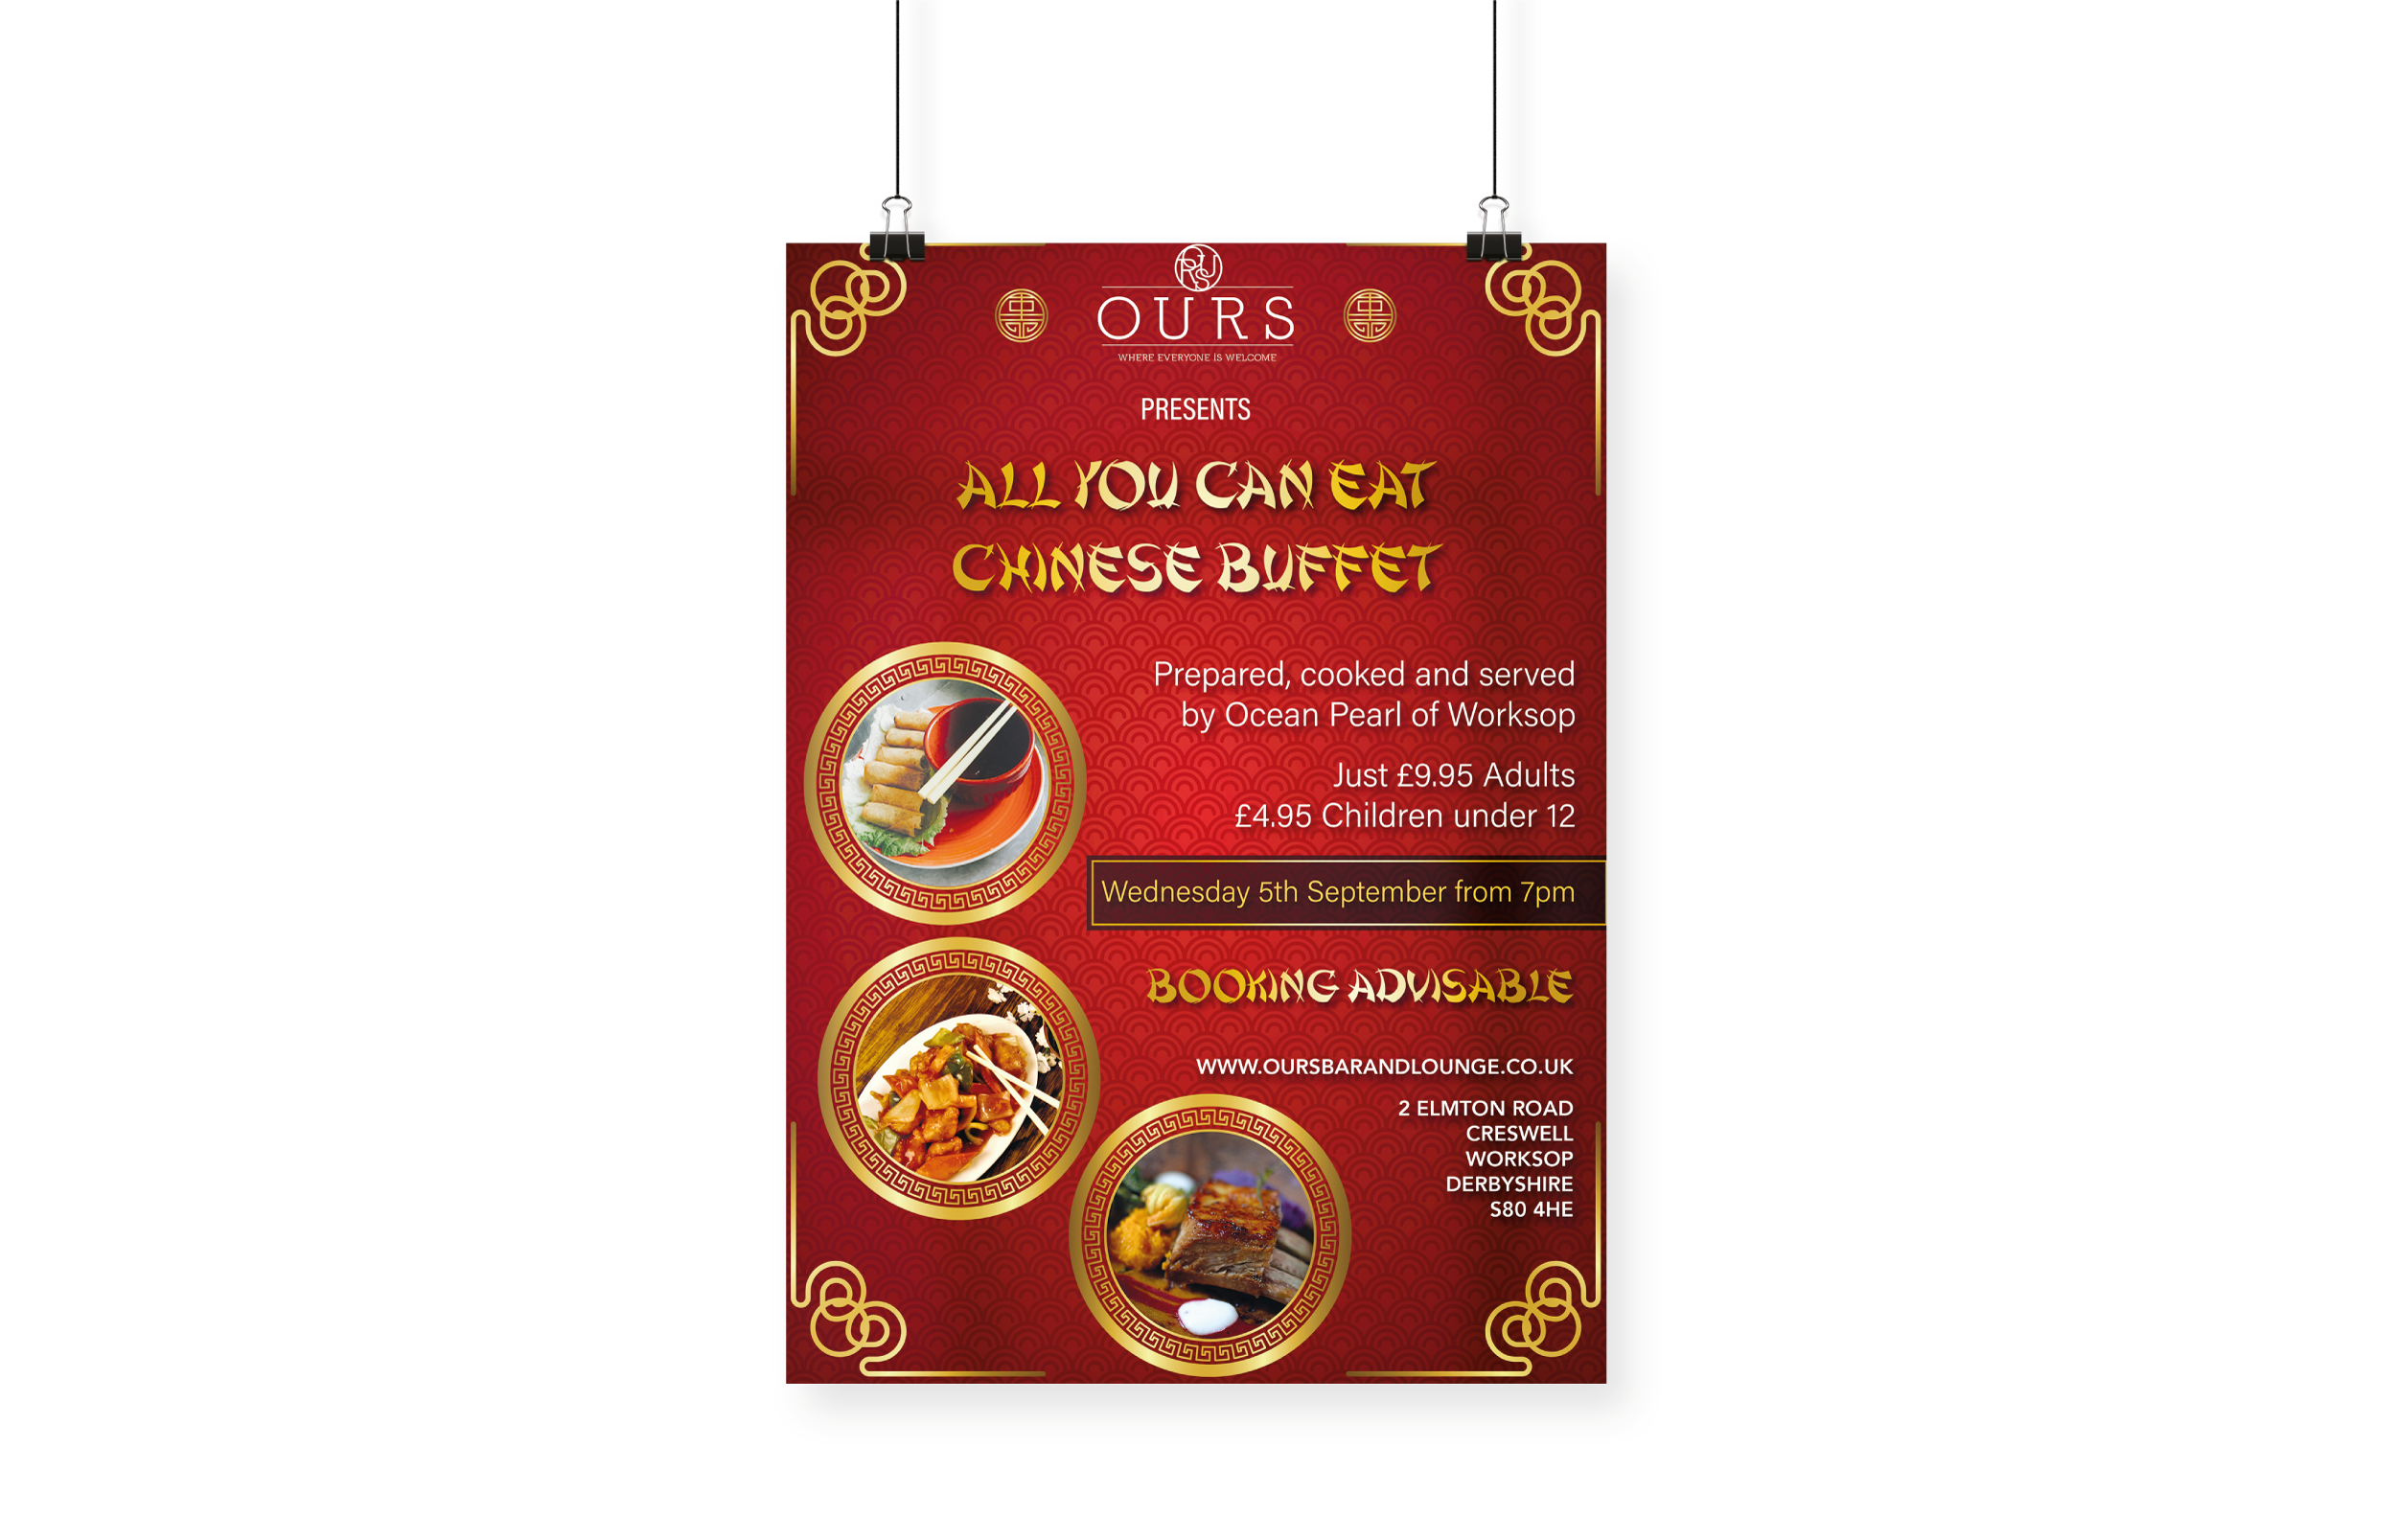 OURS Bar & Lounge Chinese Buffet Poster Design and Print (Copy)